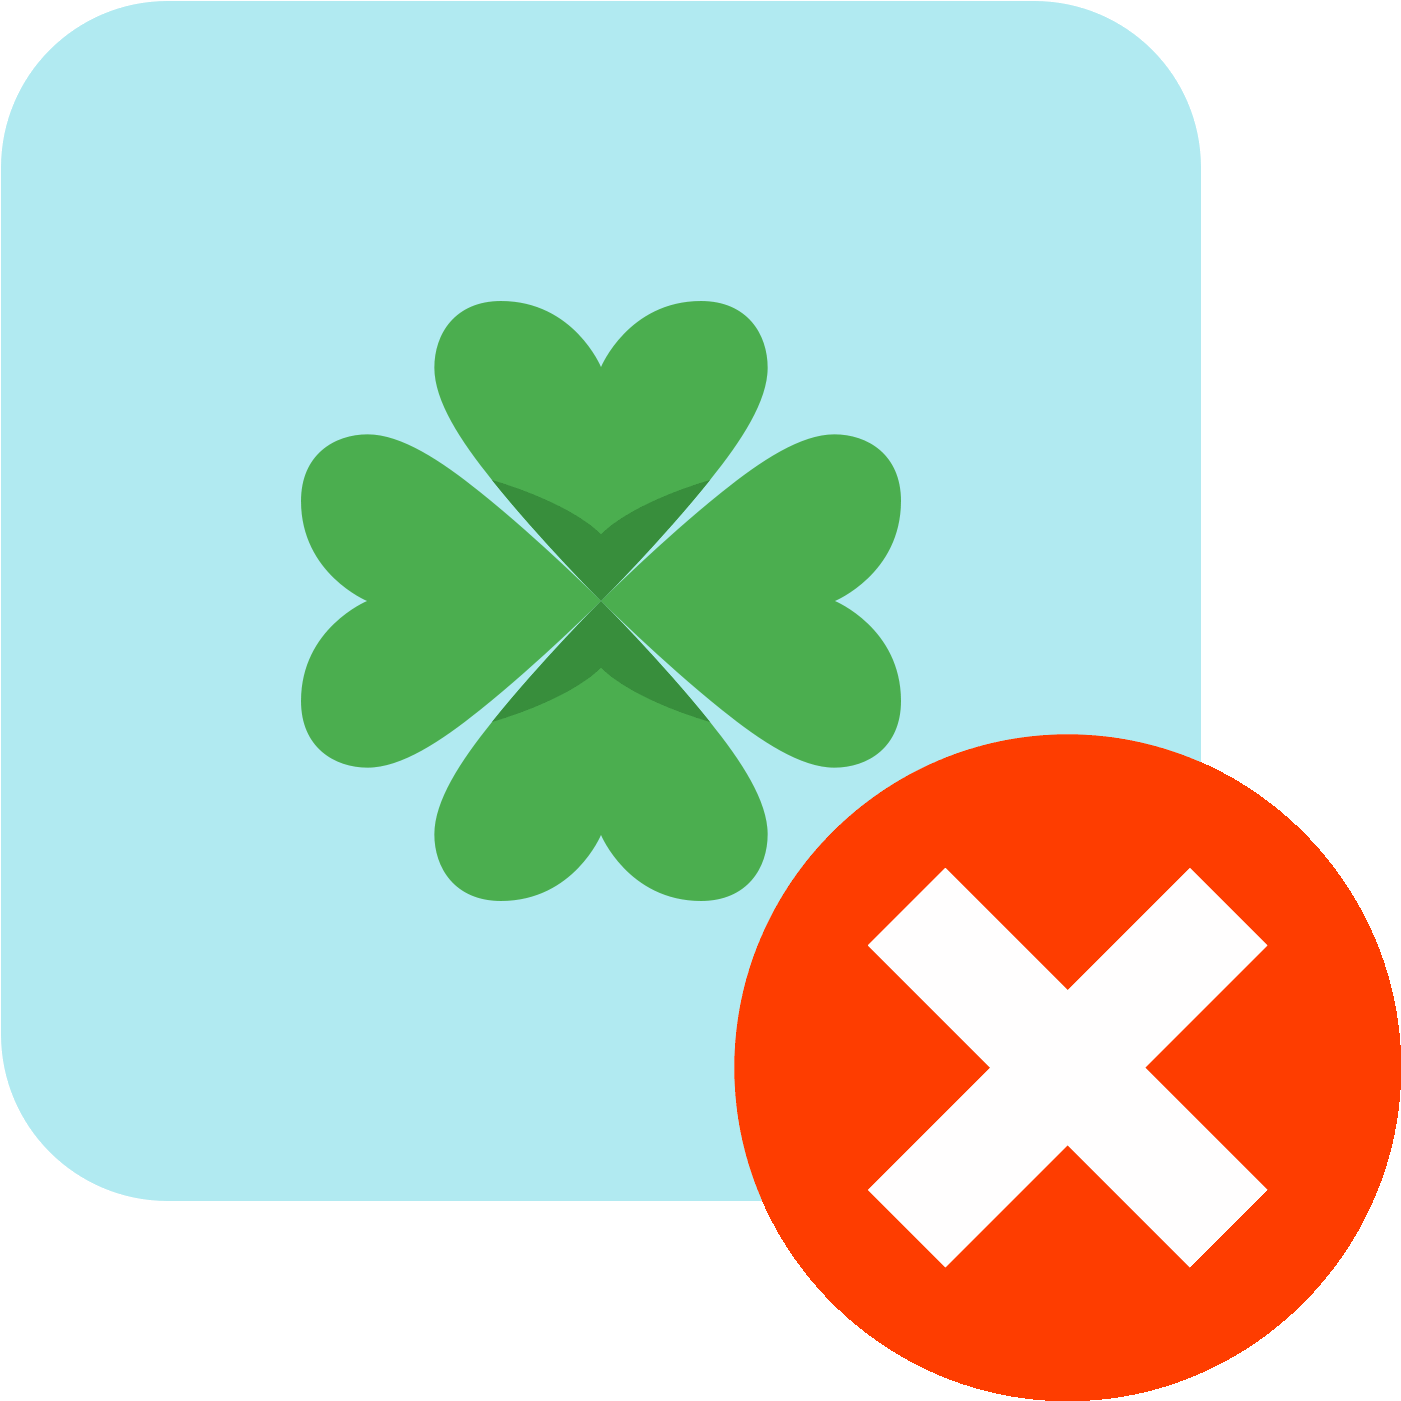 A Green Clover With A Red X